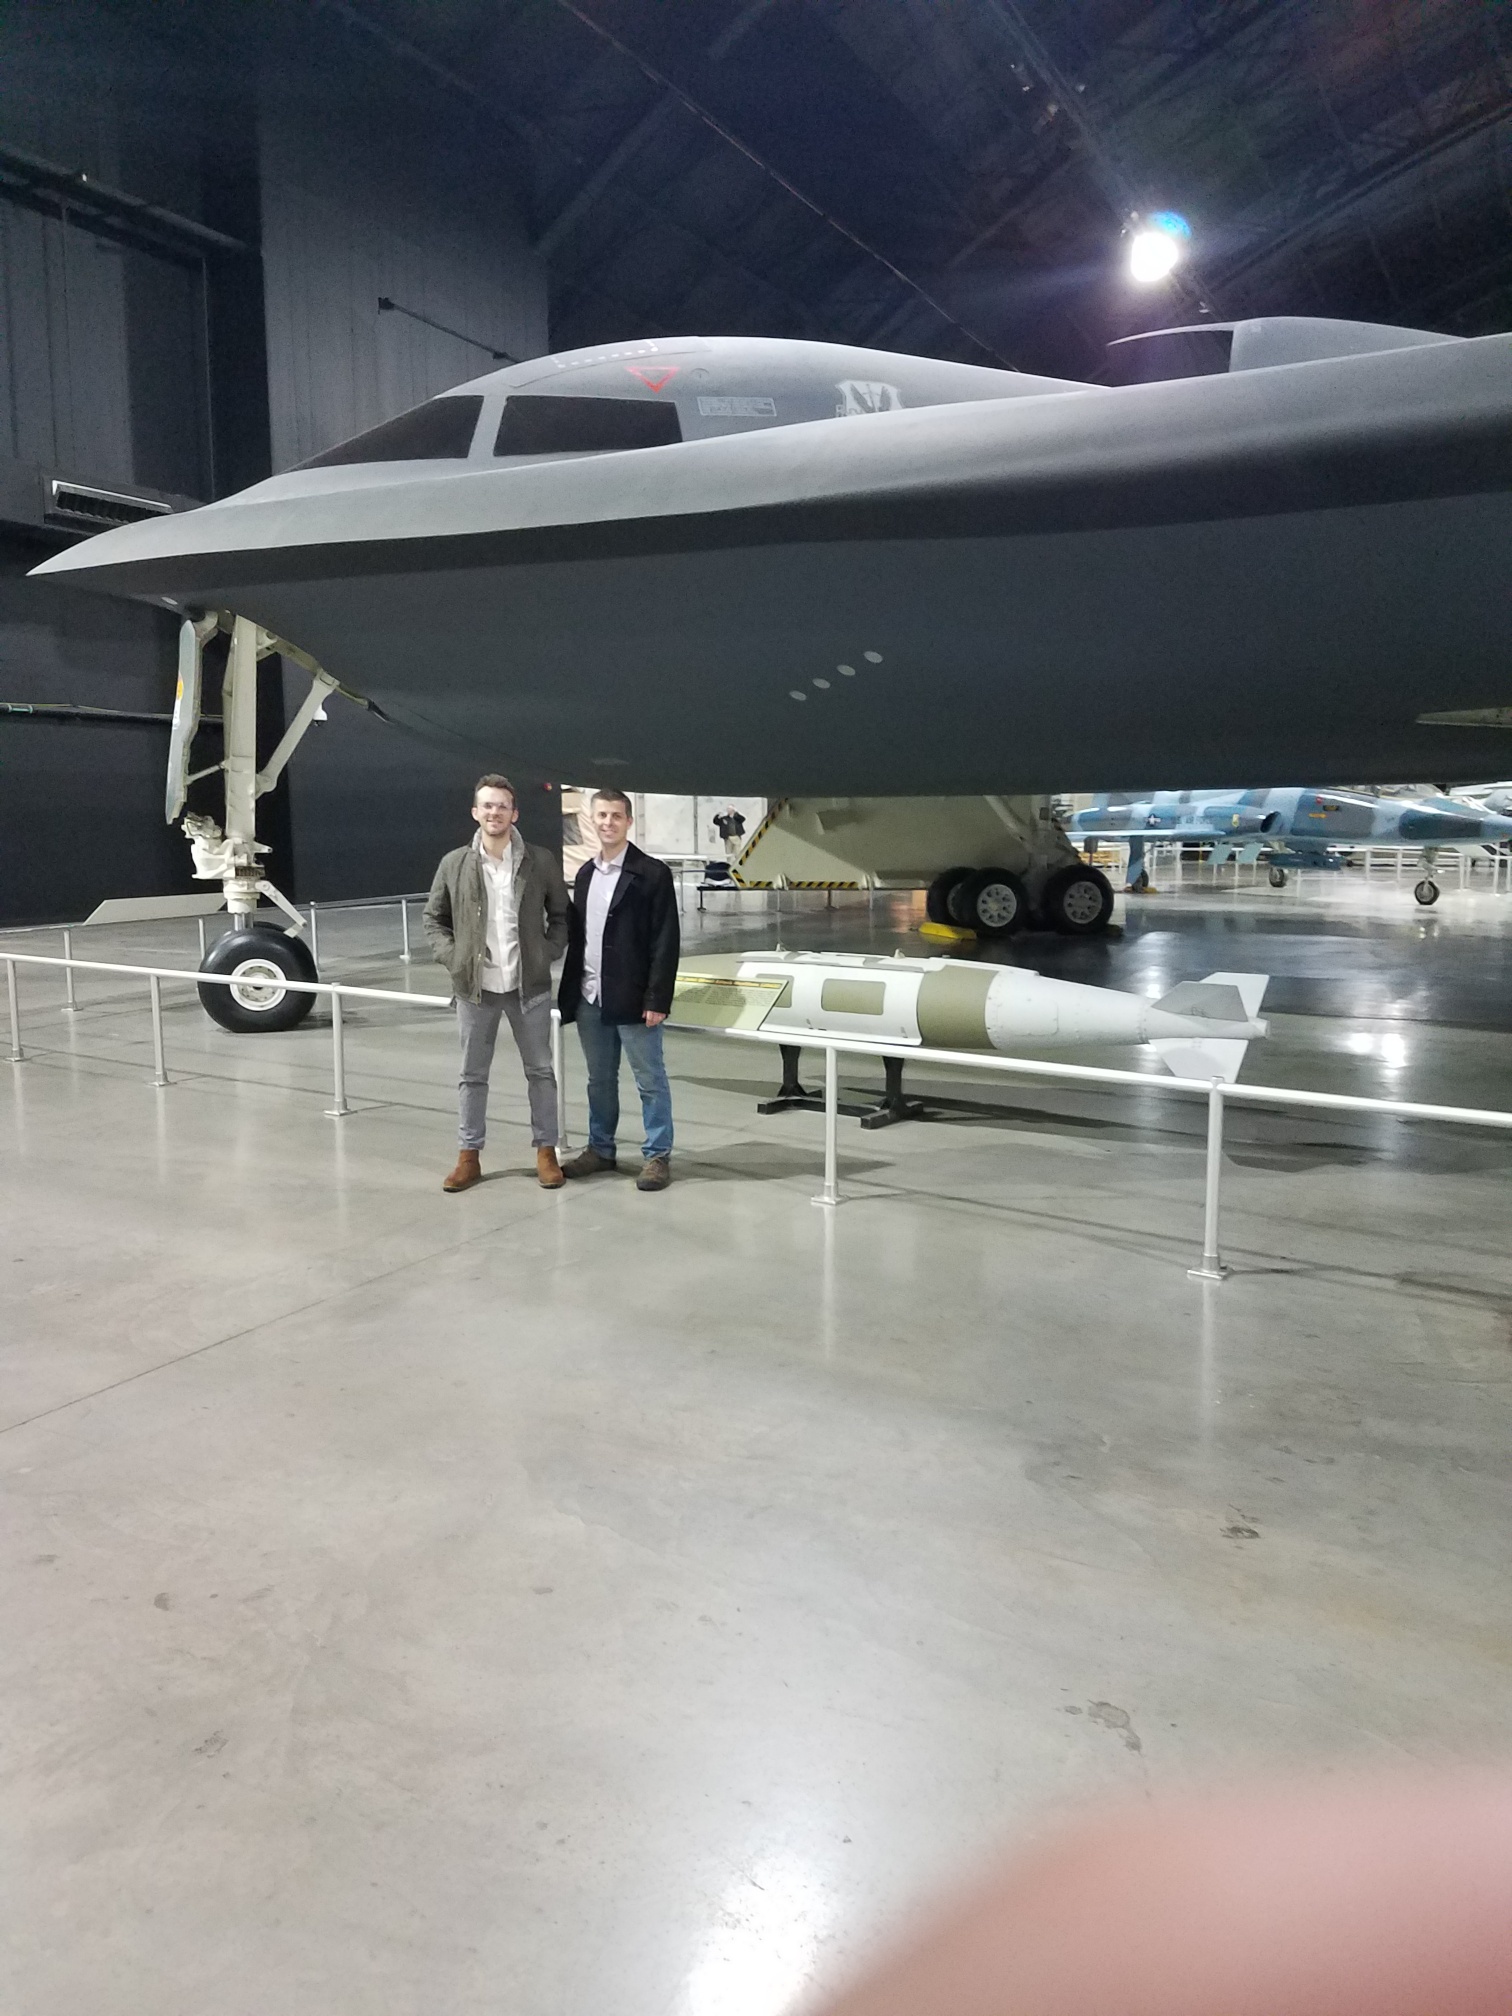 Ryan (left) and Josh (right) enjoying seeing the B-2 Stealth Bomber in person for the first time